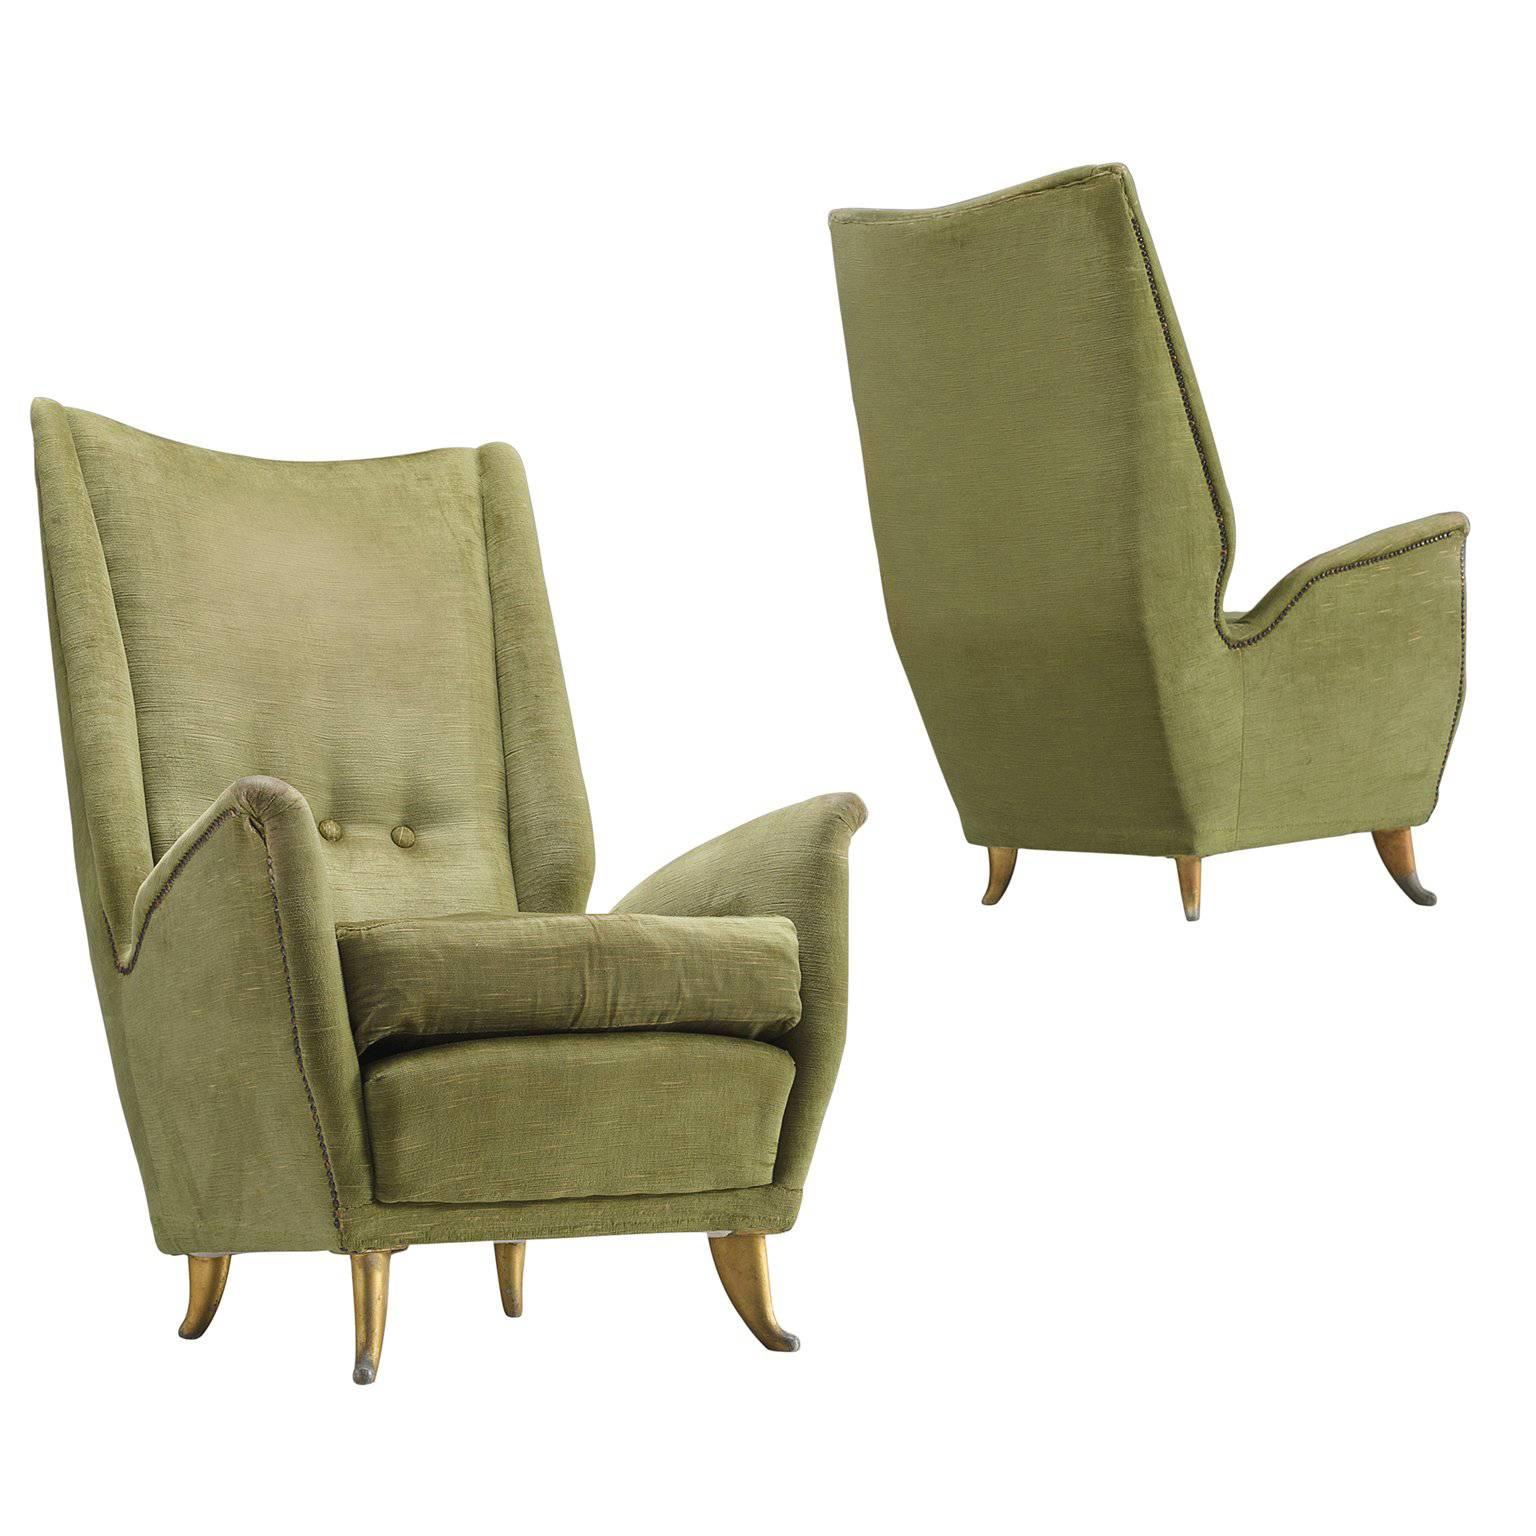 Pair of Italian High Back Lounge Chairs by ISA